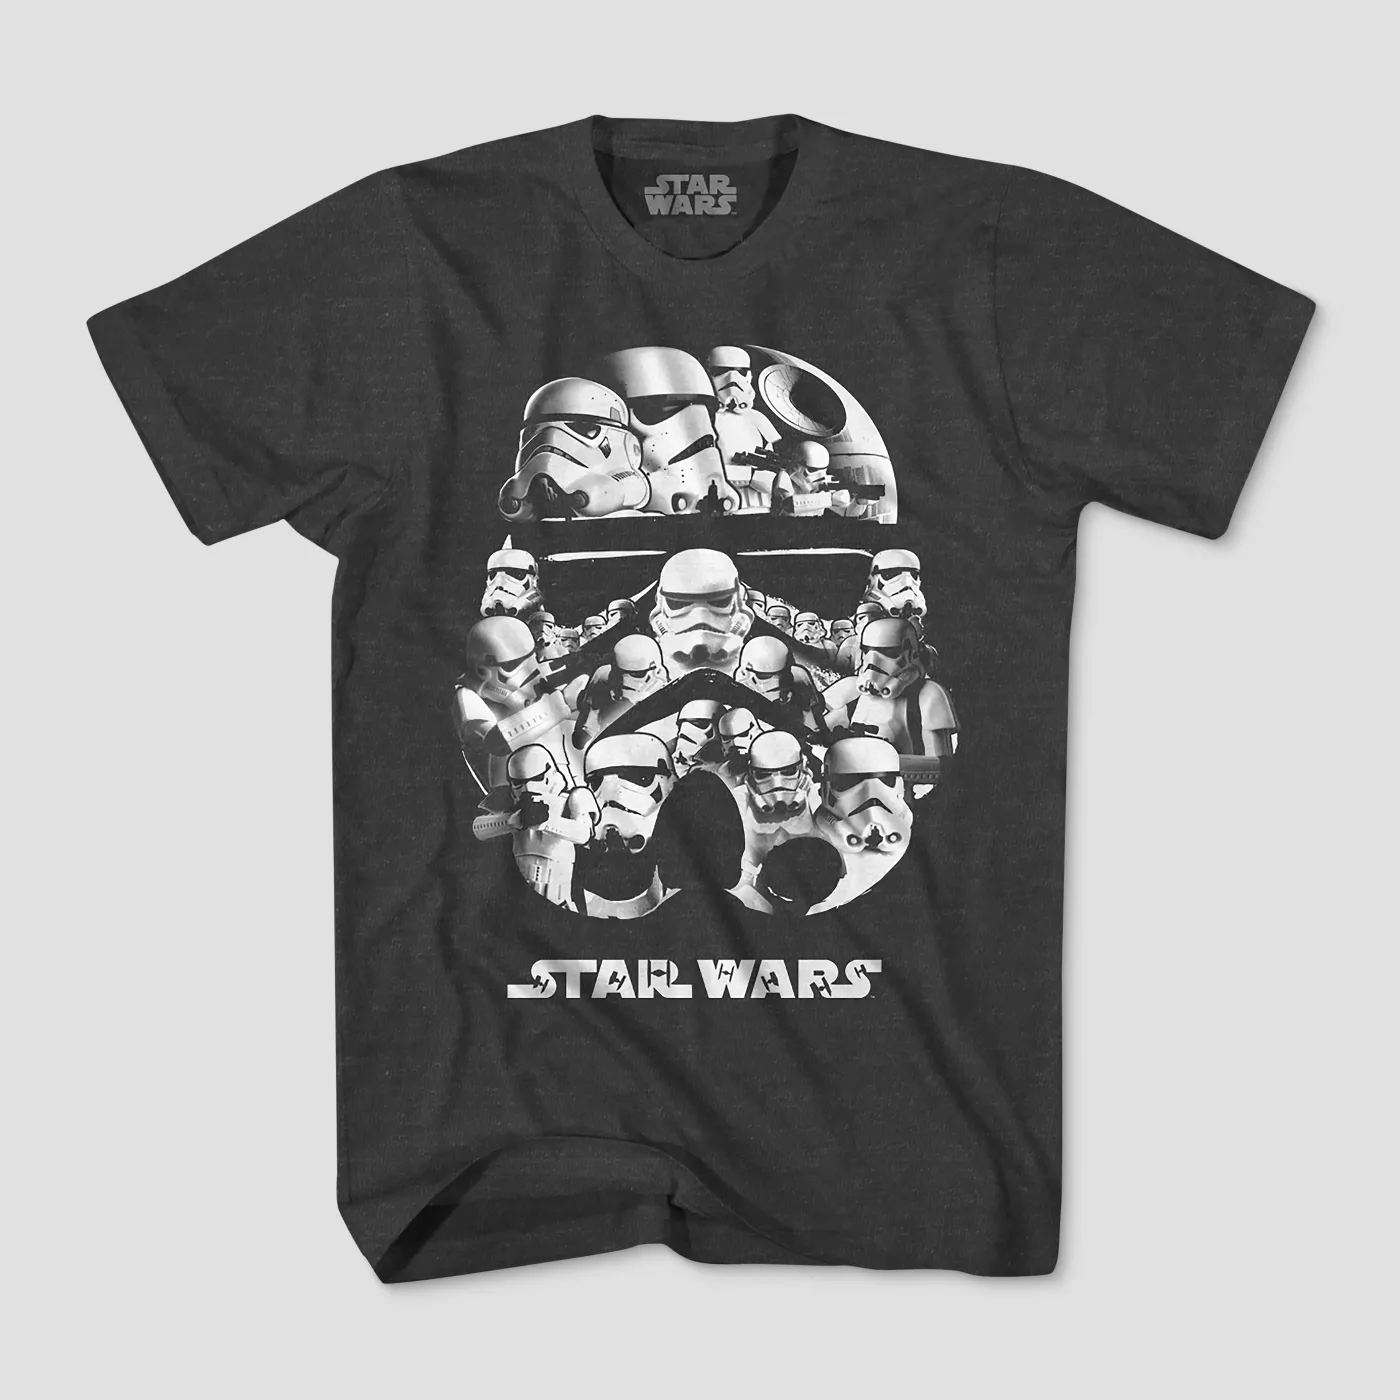 Boys' Star Wars Stormtrooper Short Sleeve T-Shirt - Charcoal Heather - image 1 of 1